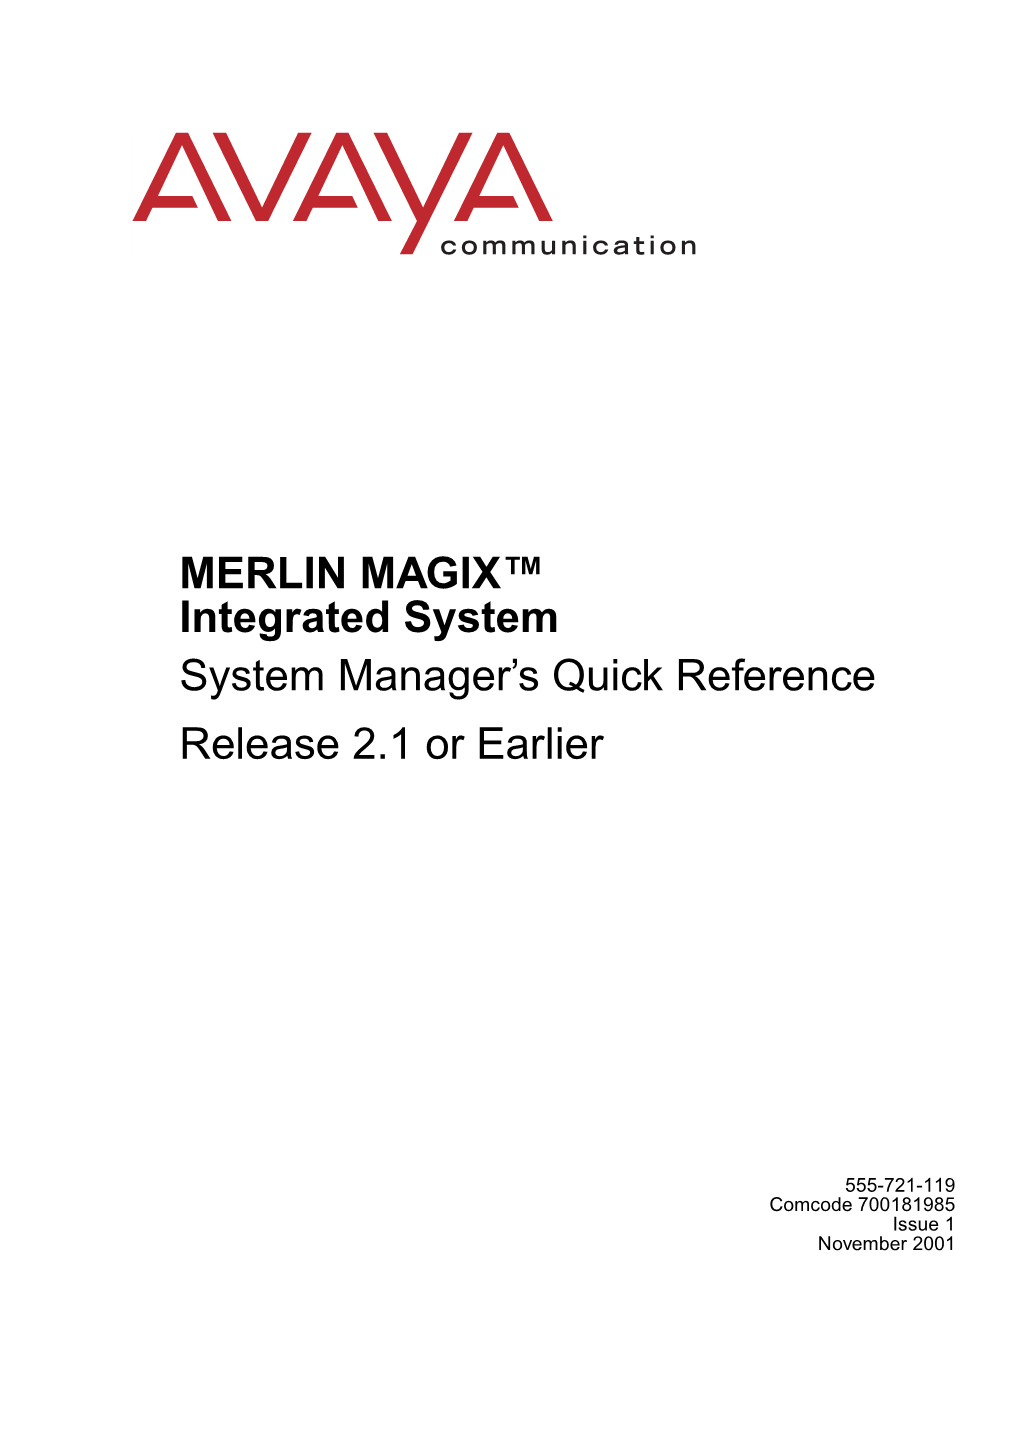 MERLIN MAGIX™ Integrated System System Manager's Quick Reference